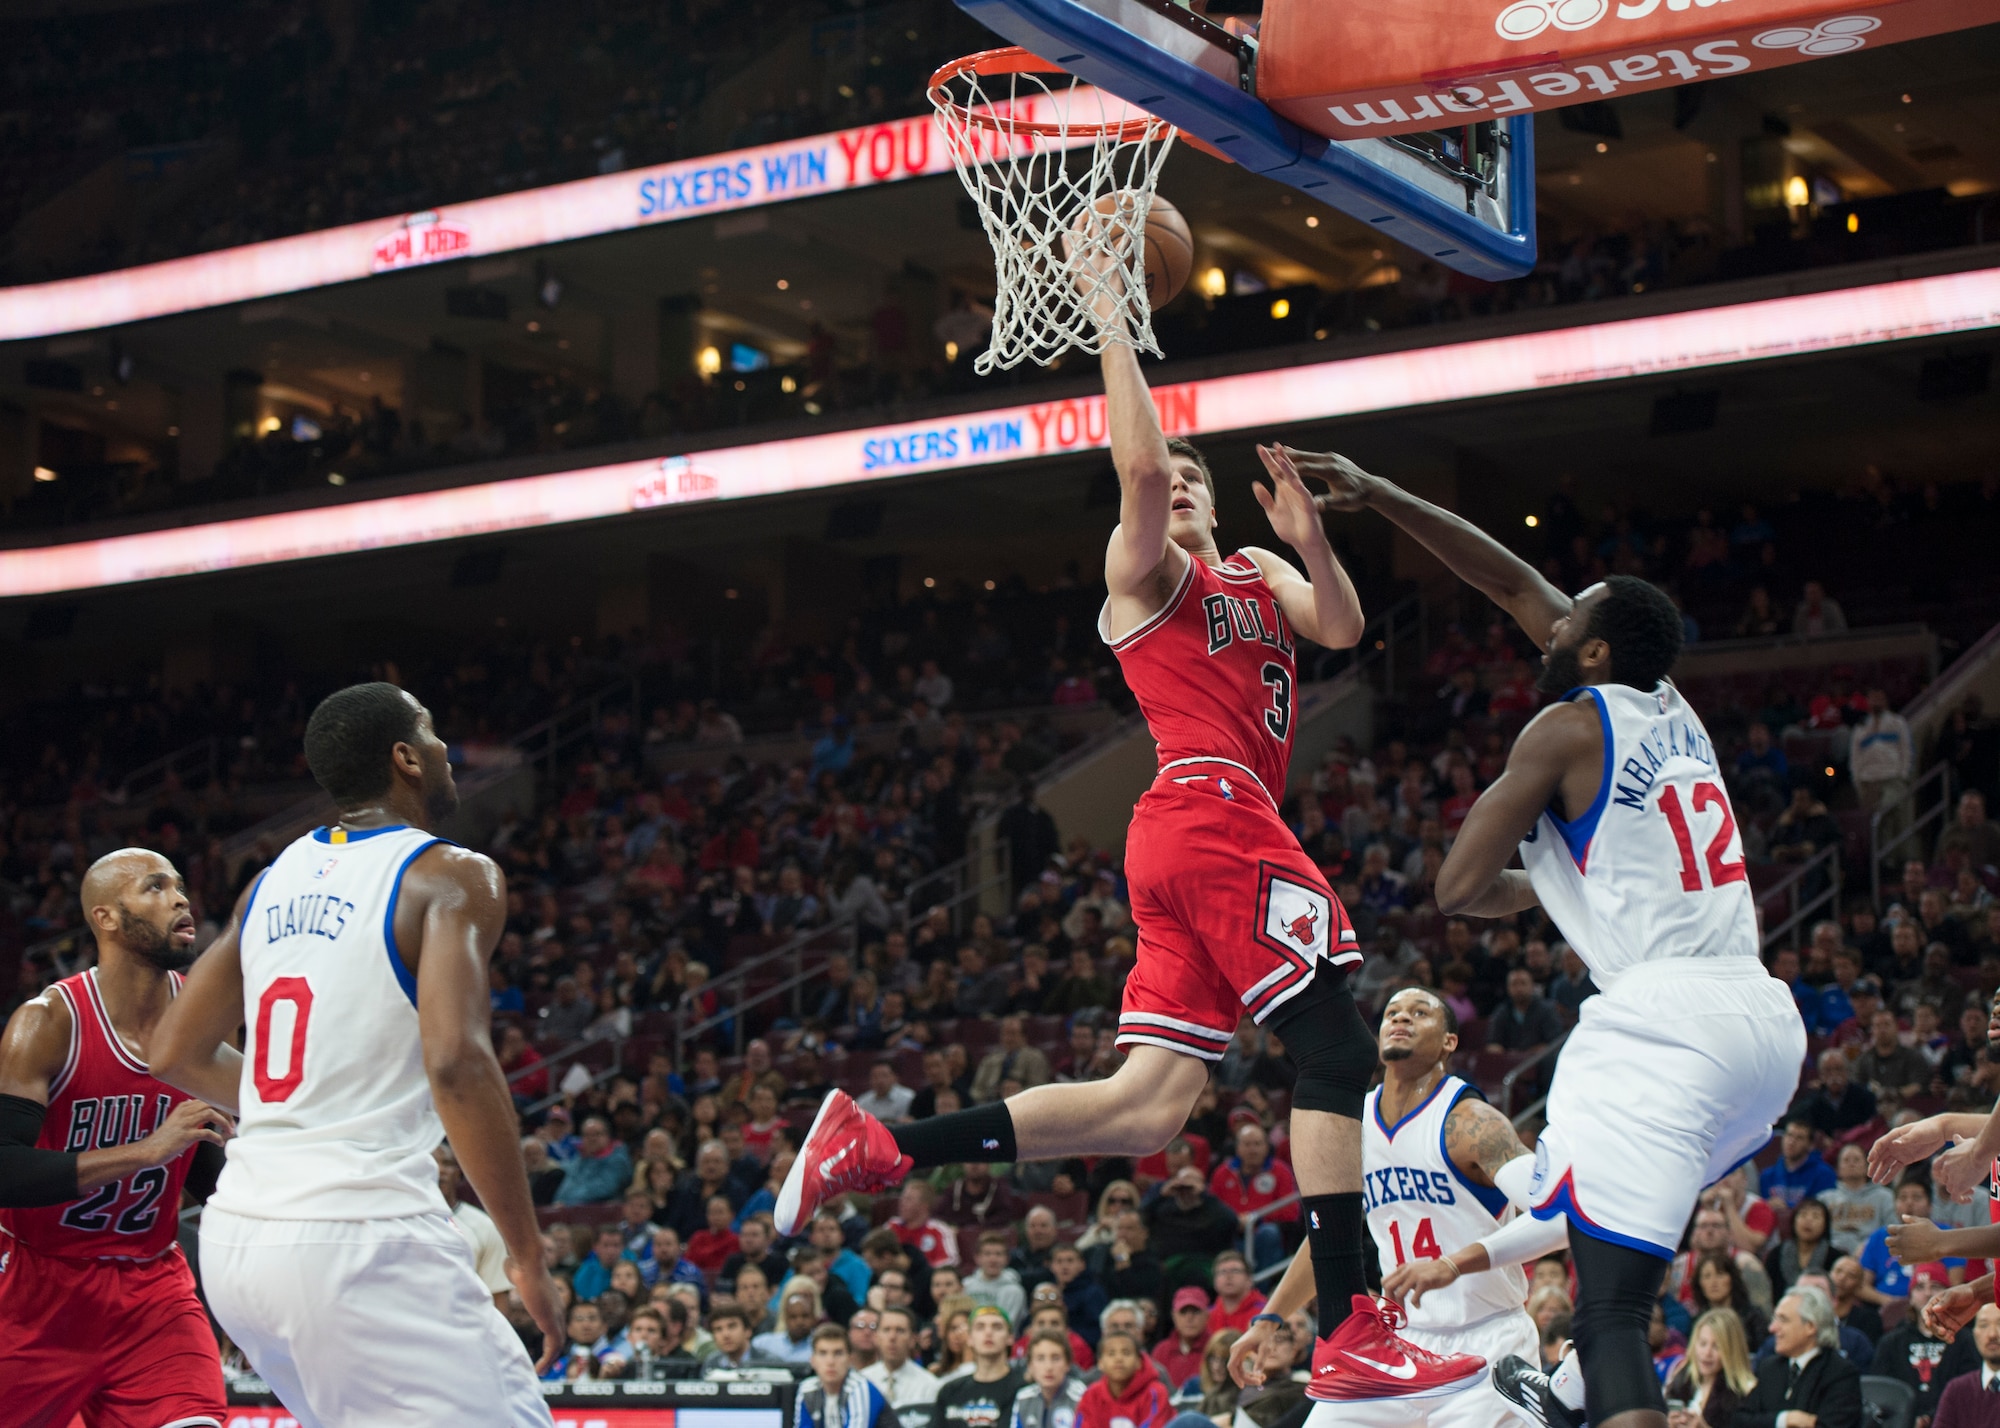 Doug McDermott, Bulls forward, goes up for a layup during the 2nd quarter of play of a Chicago Bulls versus Philadelphia 76ers basketball game Nov. 7, 2014, at the Wells Fargo Center, in Philadelphia. The Bulls beat the 76ers, 118-115, for their fourth straight win. (U.S. Air Force photo/Airman 1st Class Zachary Cacicia)